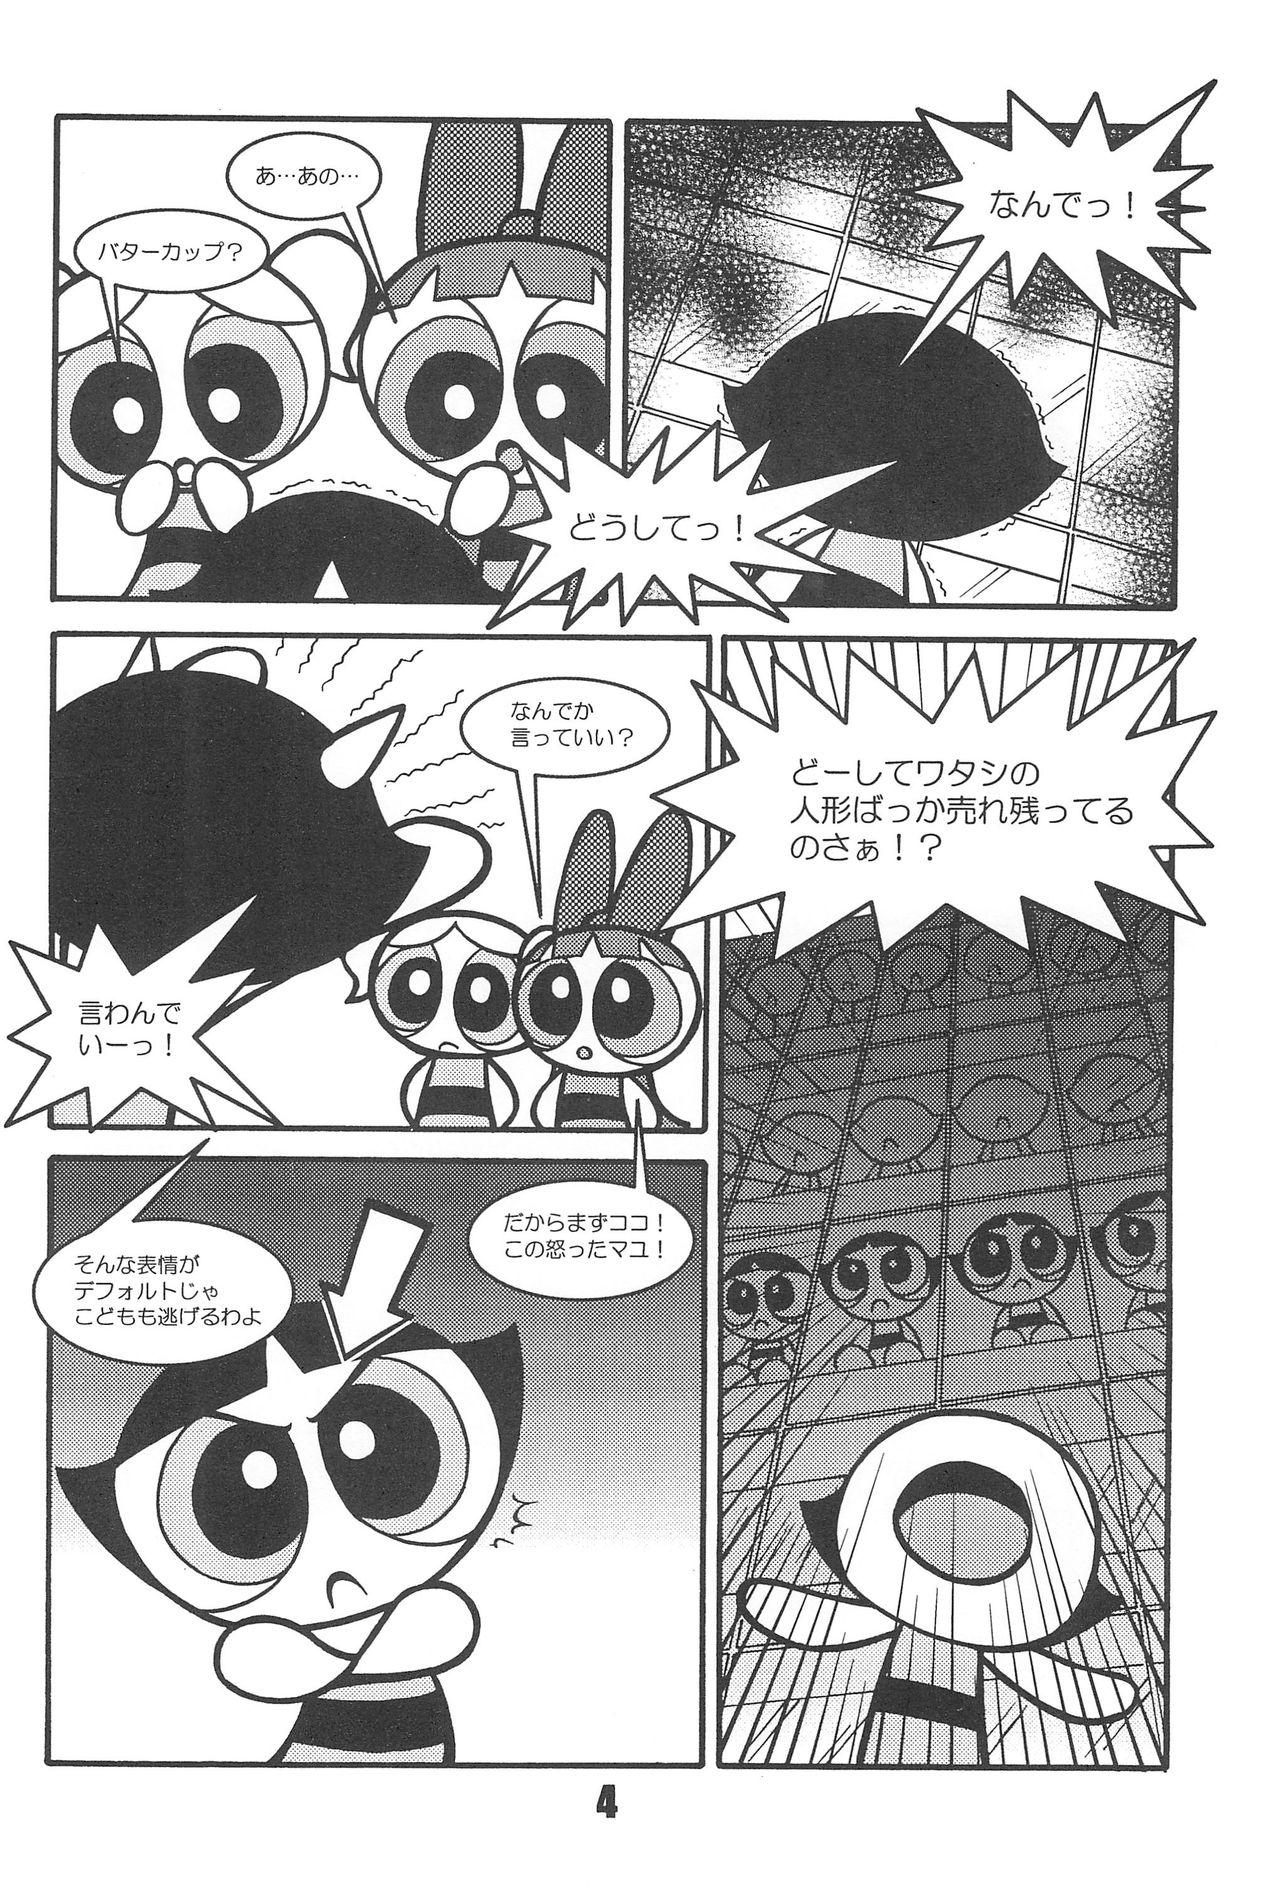 Tit Show Goes On! Funhouse 22th - The powerpuff girls Panocha - Page 4